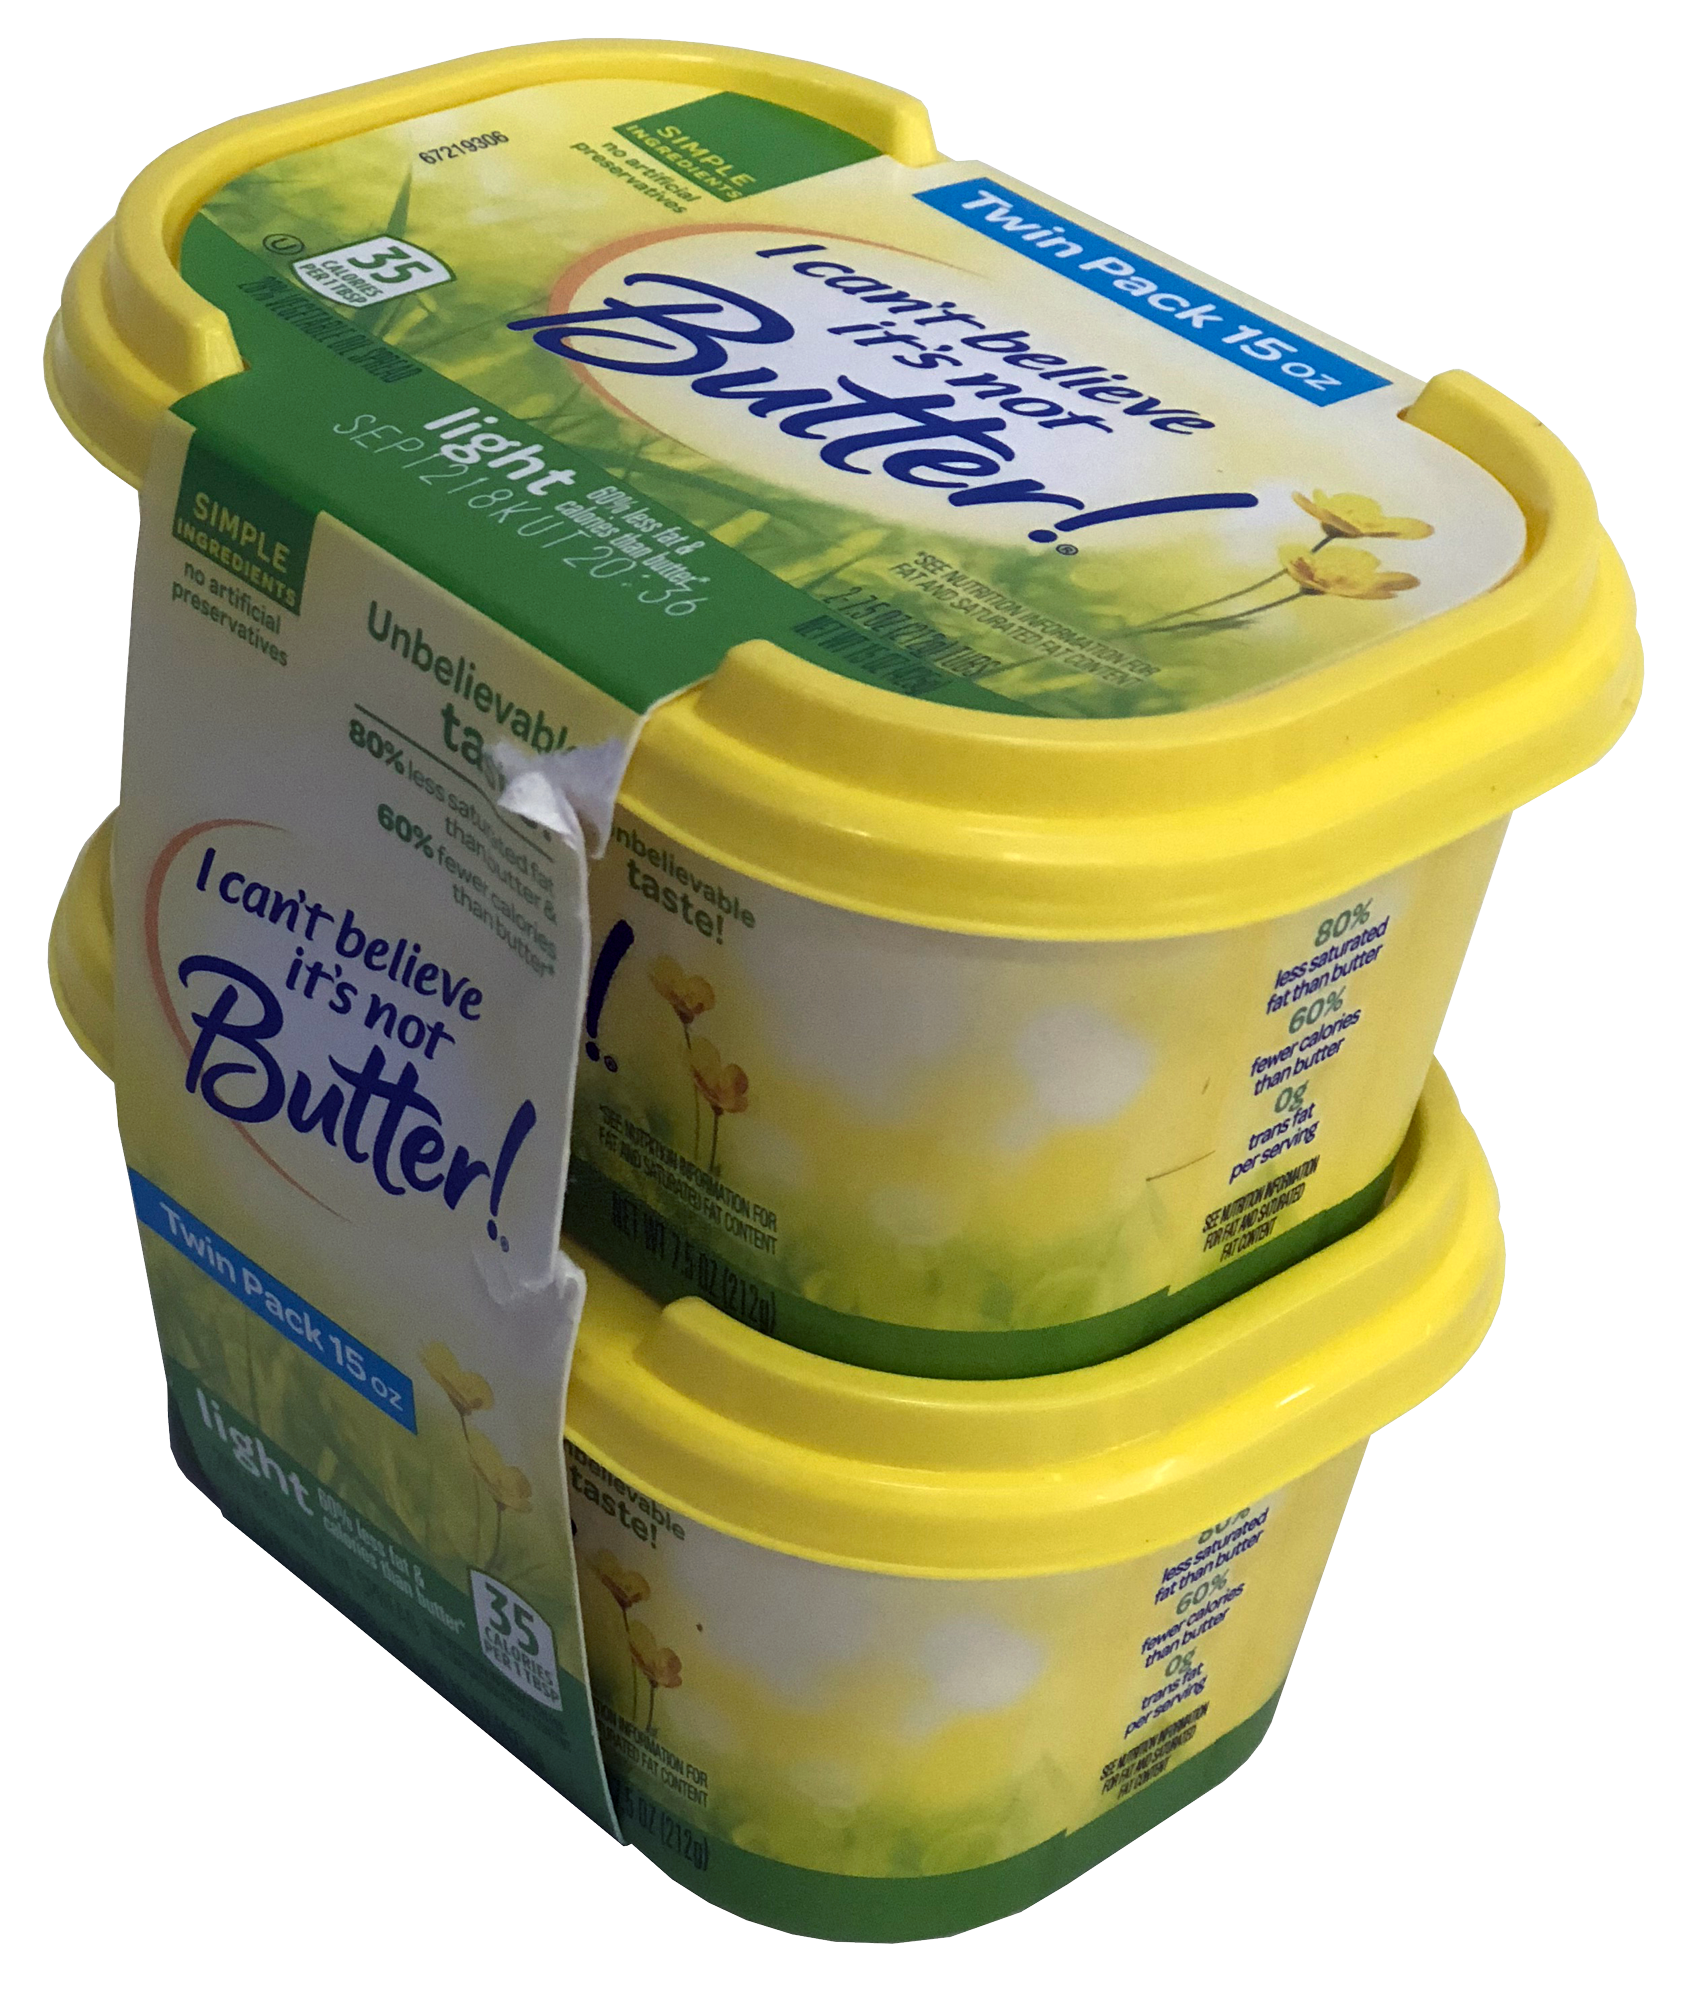 2-pack of butter